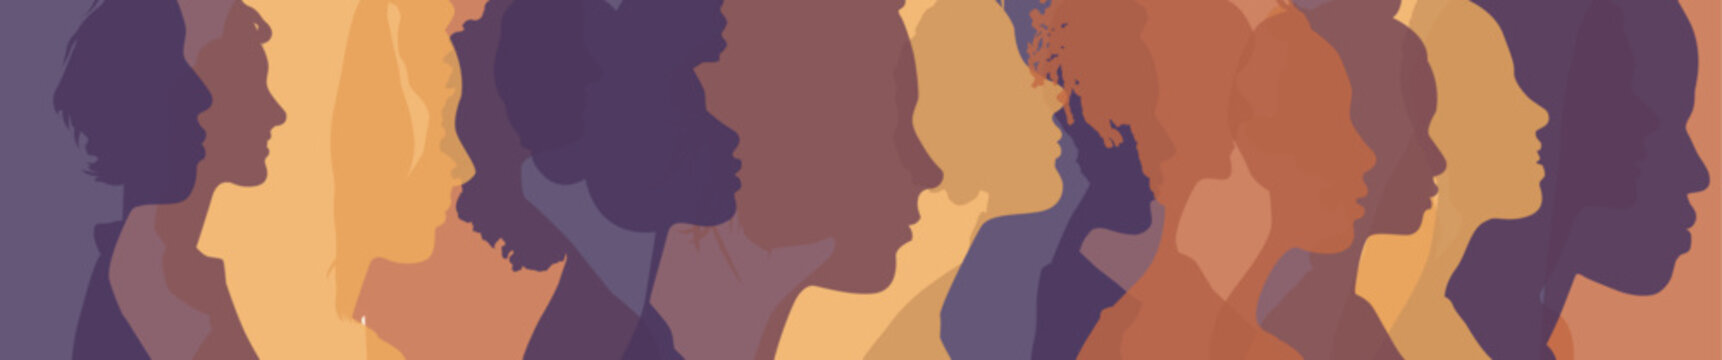 Banner of different silhouettes of women - International women's day